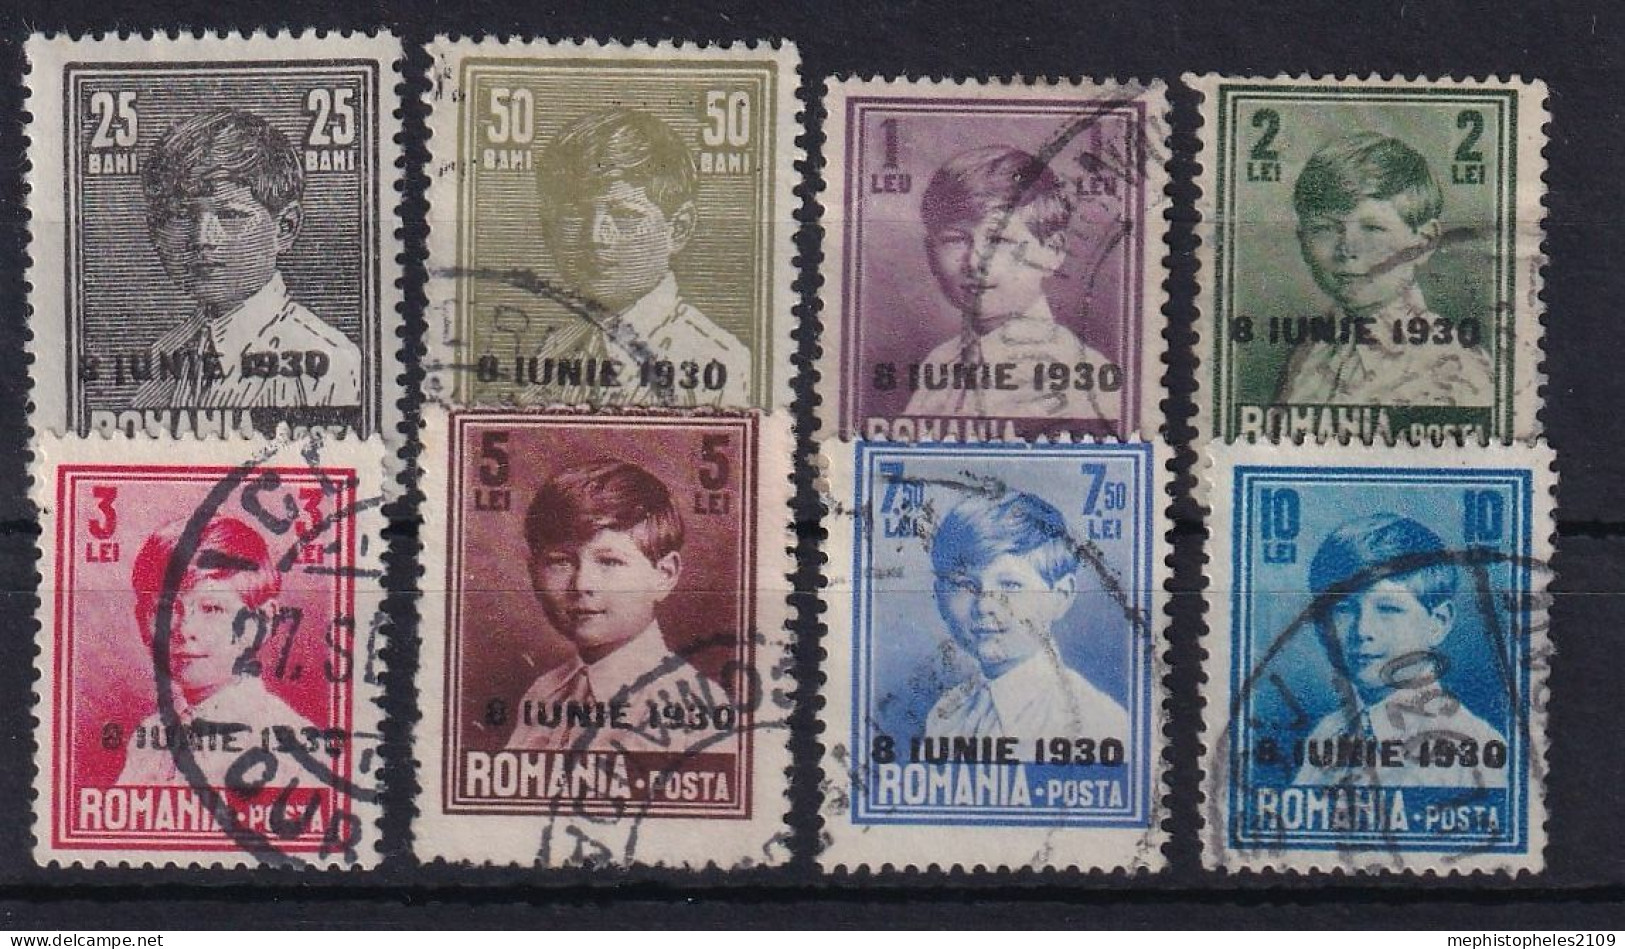 ROMANIA 1930 - Canceled - Sc# 359, 361, 363, 364, 365, 362, 366, 367 - Used Stamps